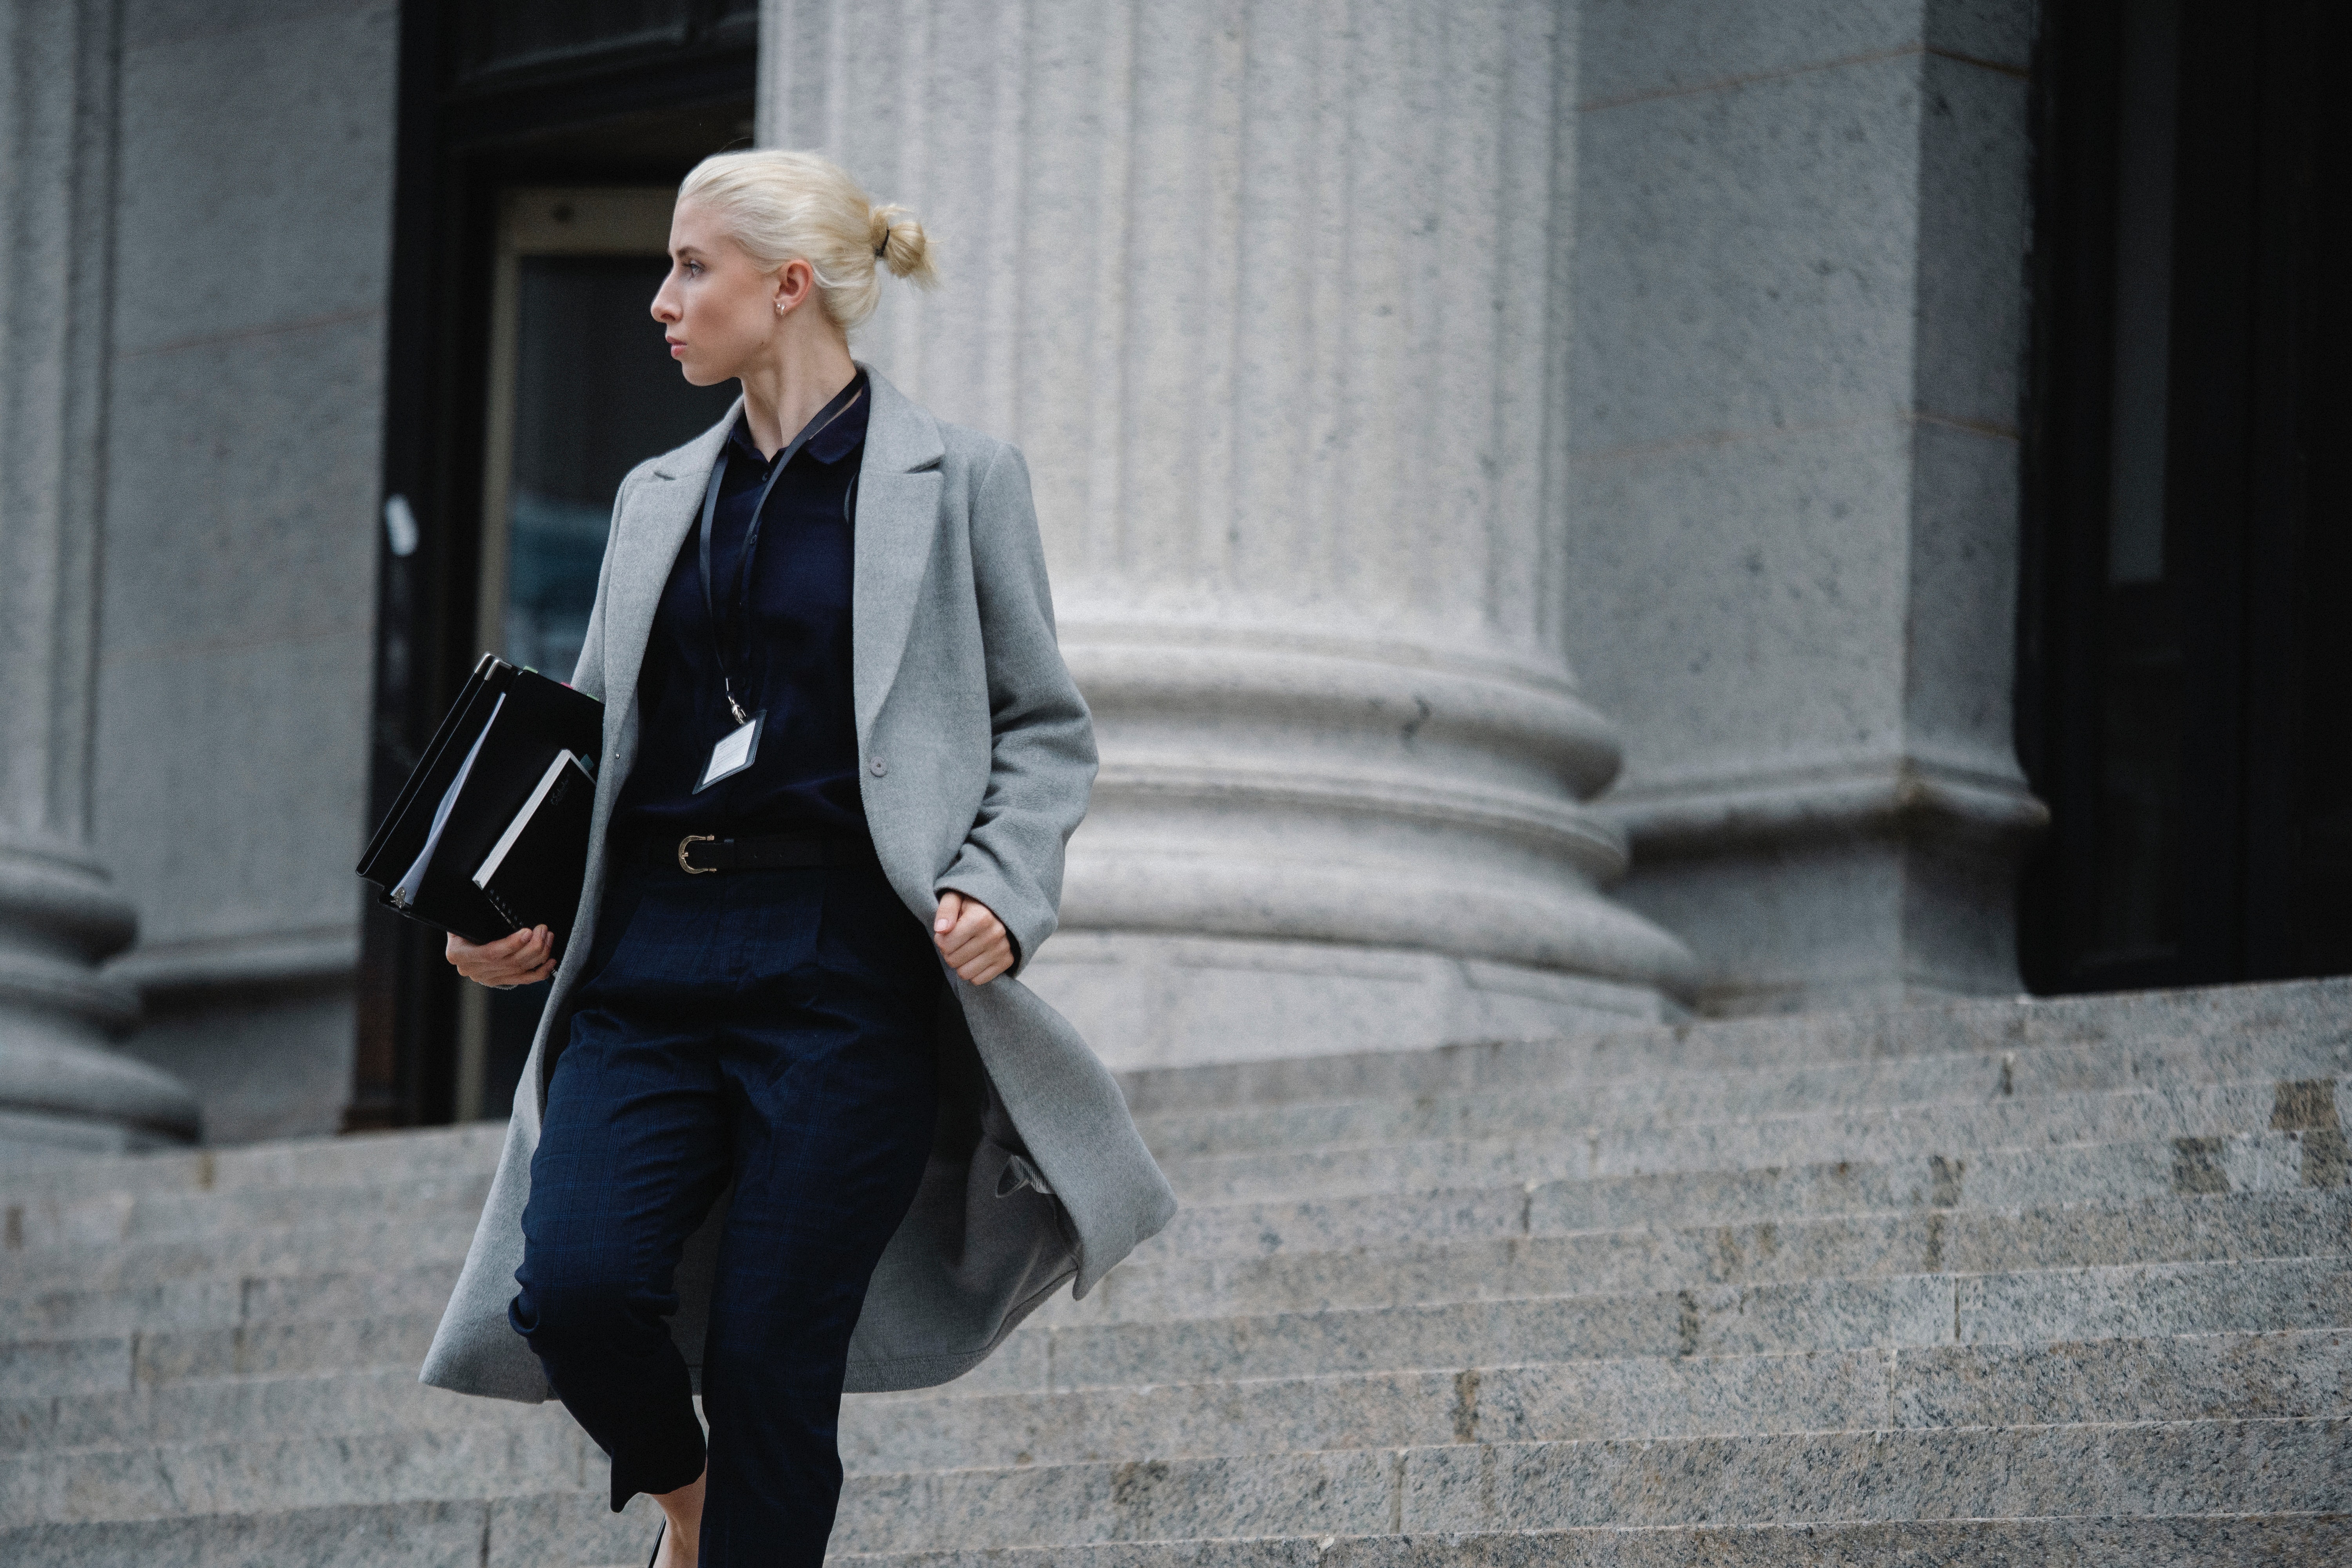 A woman walking down courthouse stairs. | Source: Pexels